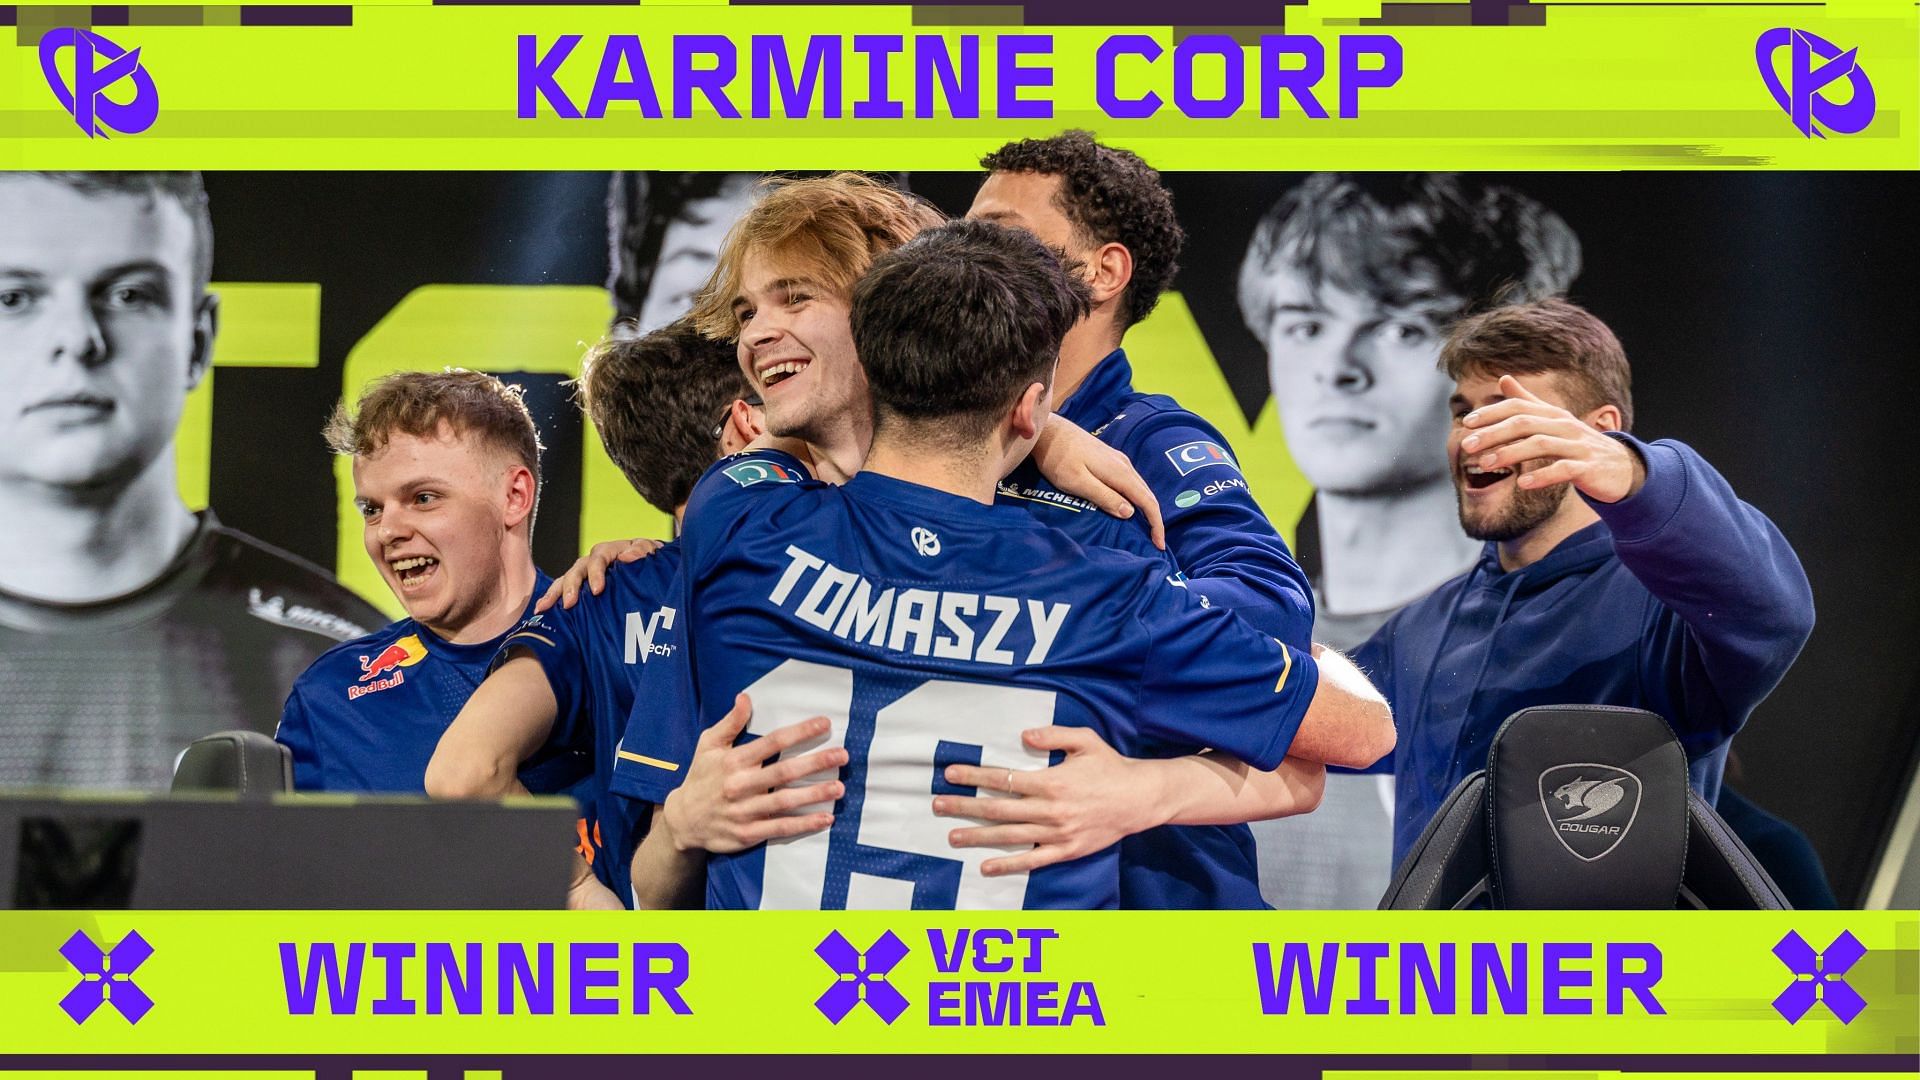 French VCT-partnered team Karmine Corp will be playing at VCT Masters Madrid (Image via Riot Games)